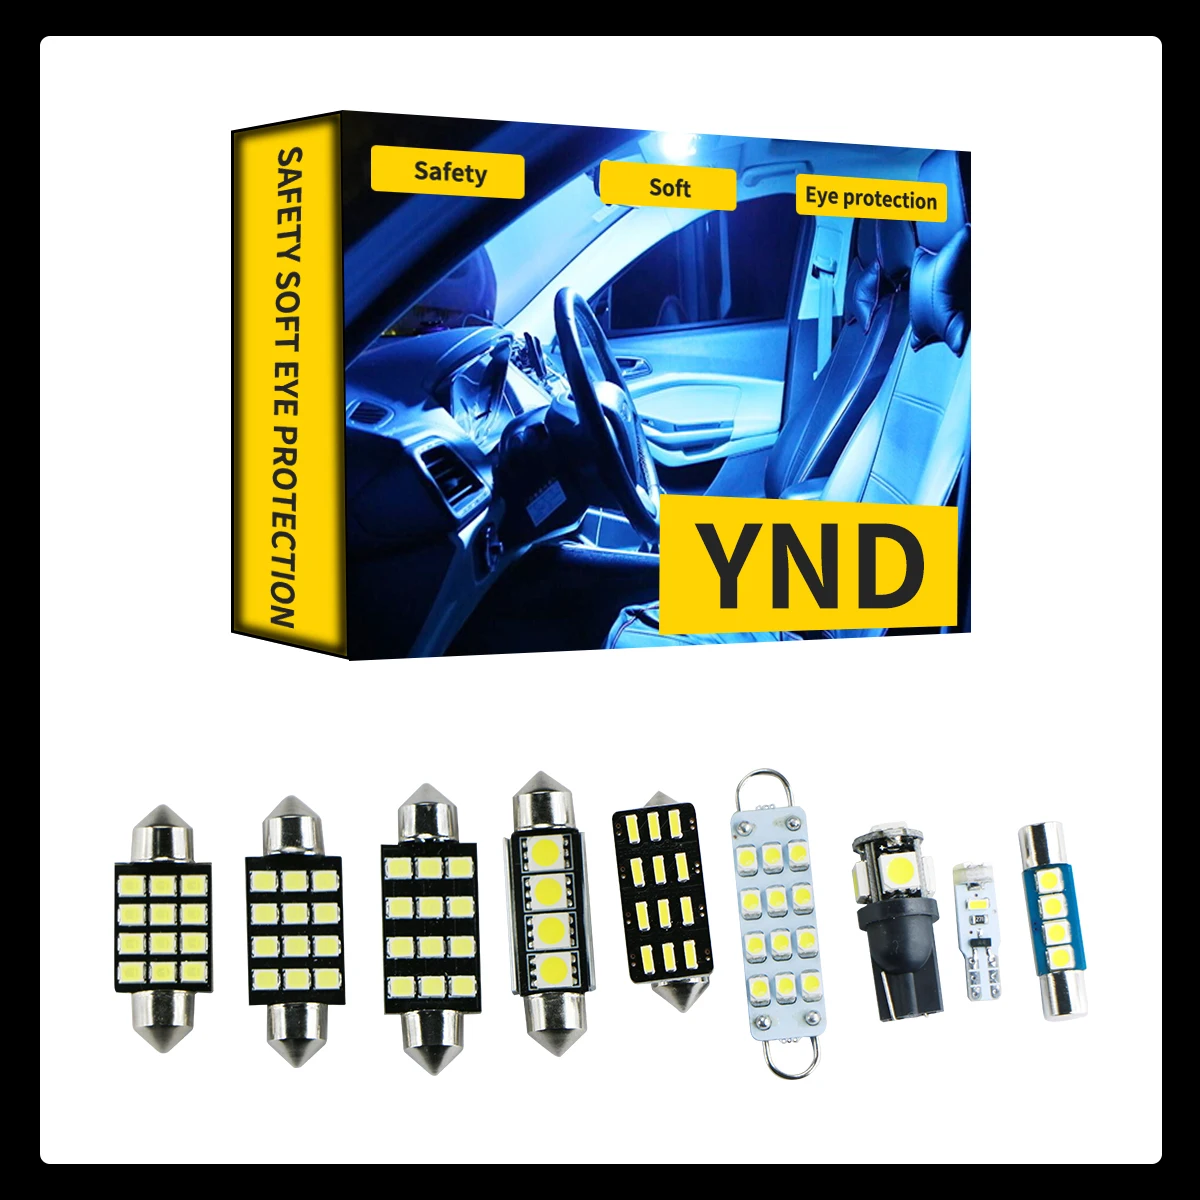 

YND 6x LED Interior Light For Lexus CT200h HS250h GX GX460 GX470 2003-2019 Light SMD Full LED Interior Lights Package Deal